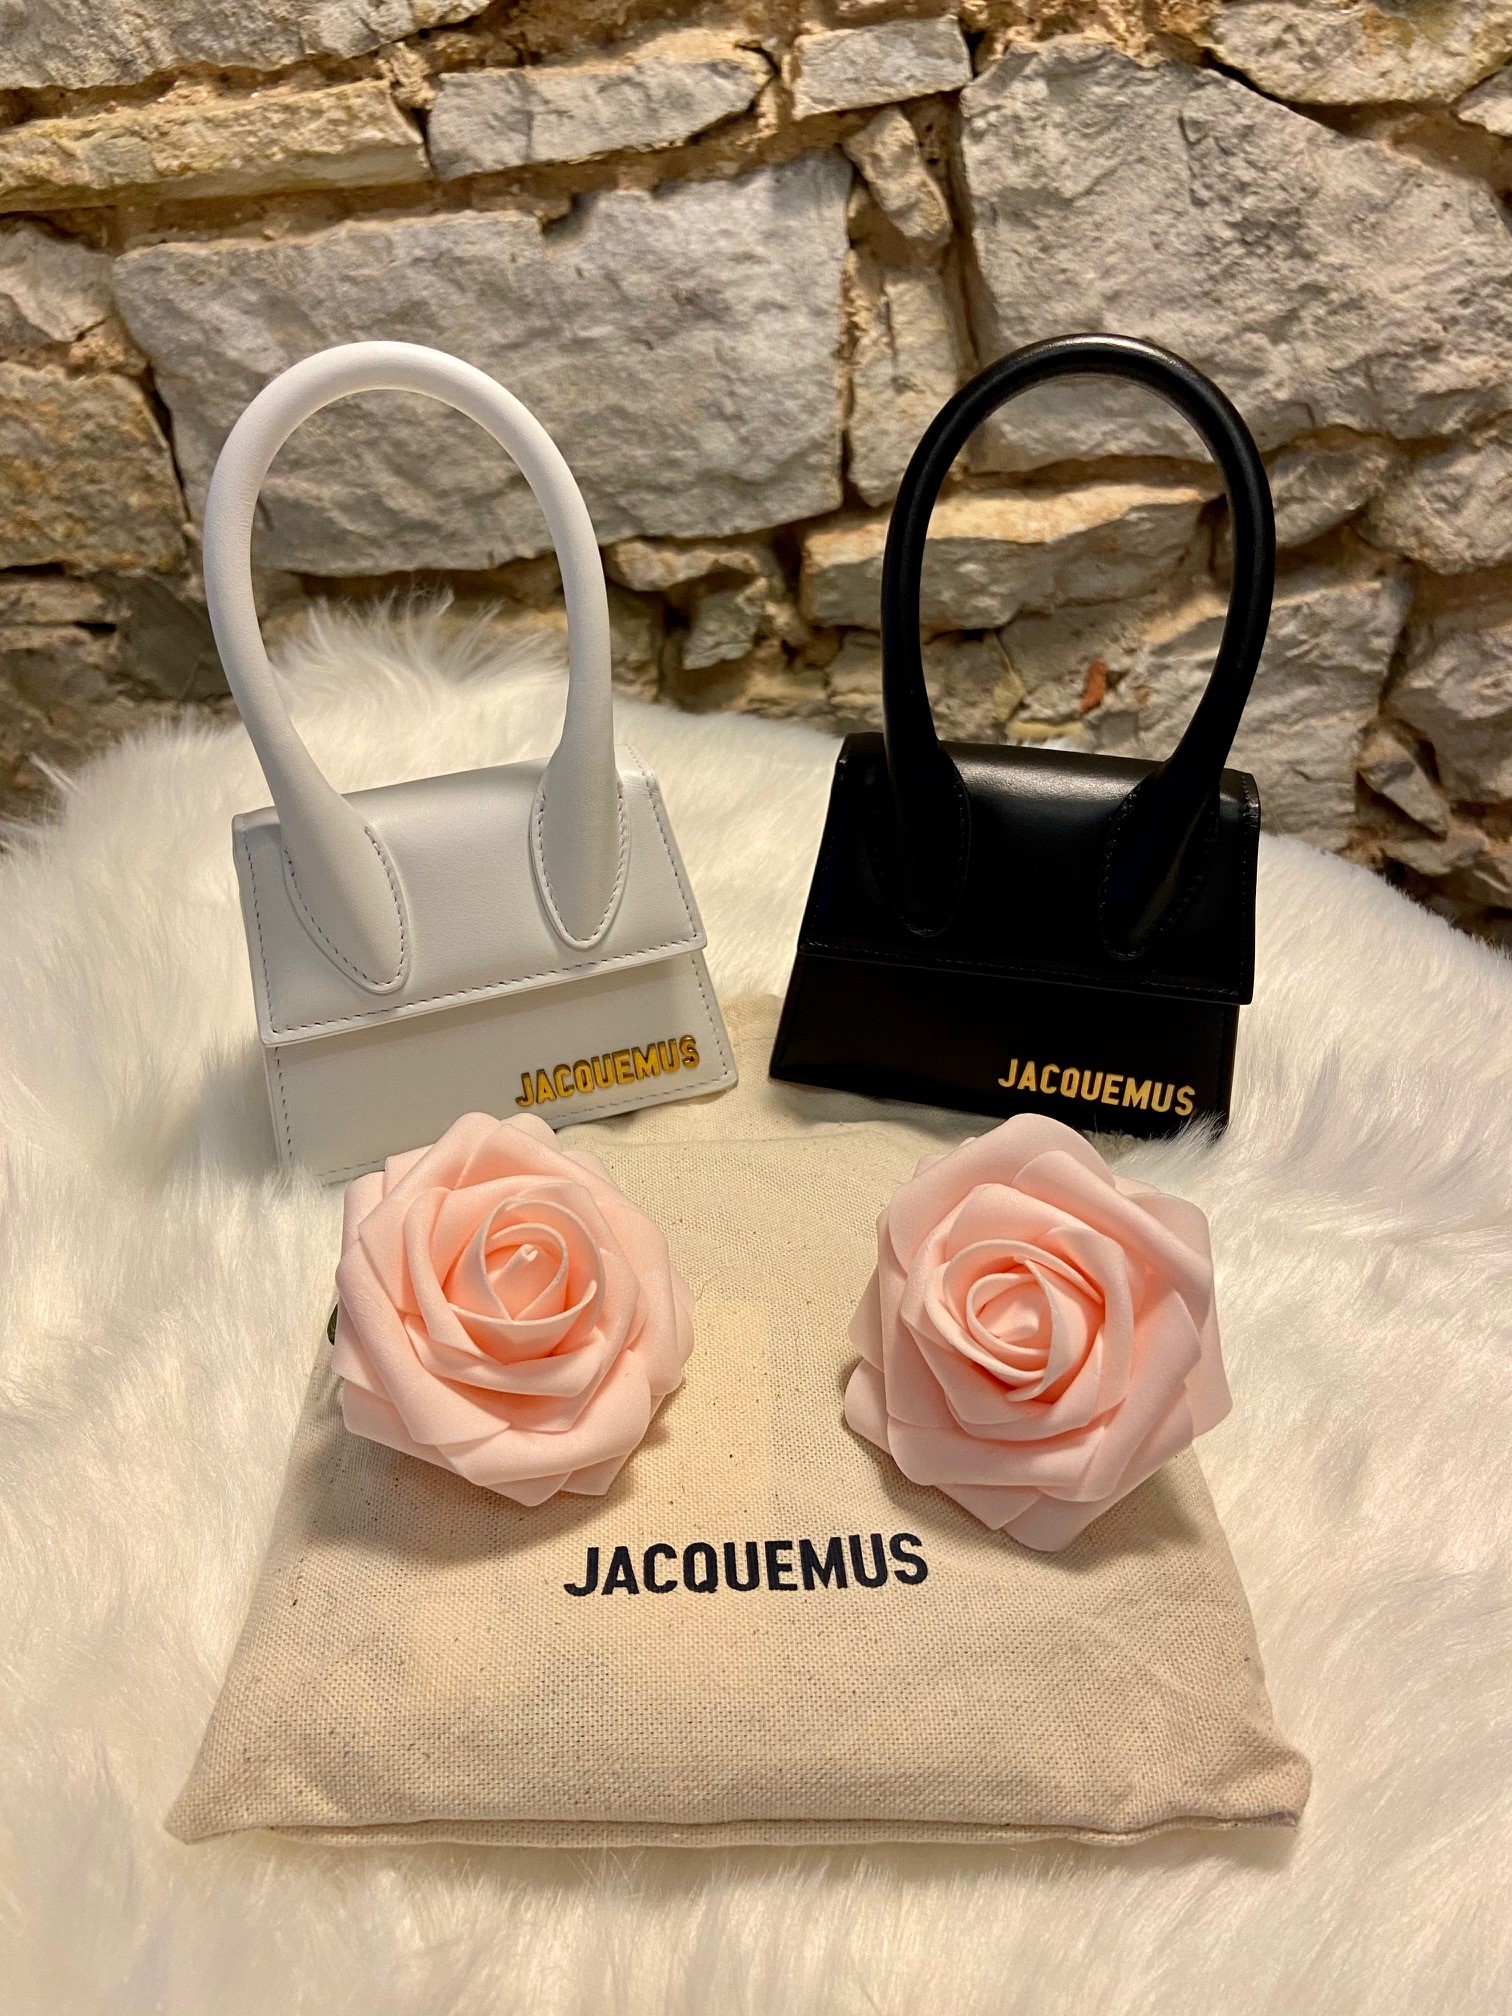 My Year of Carrying a Tiny Jacquemus Bag